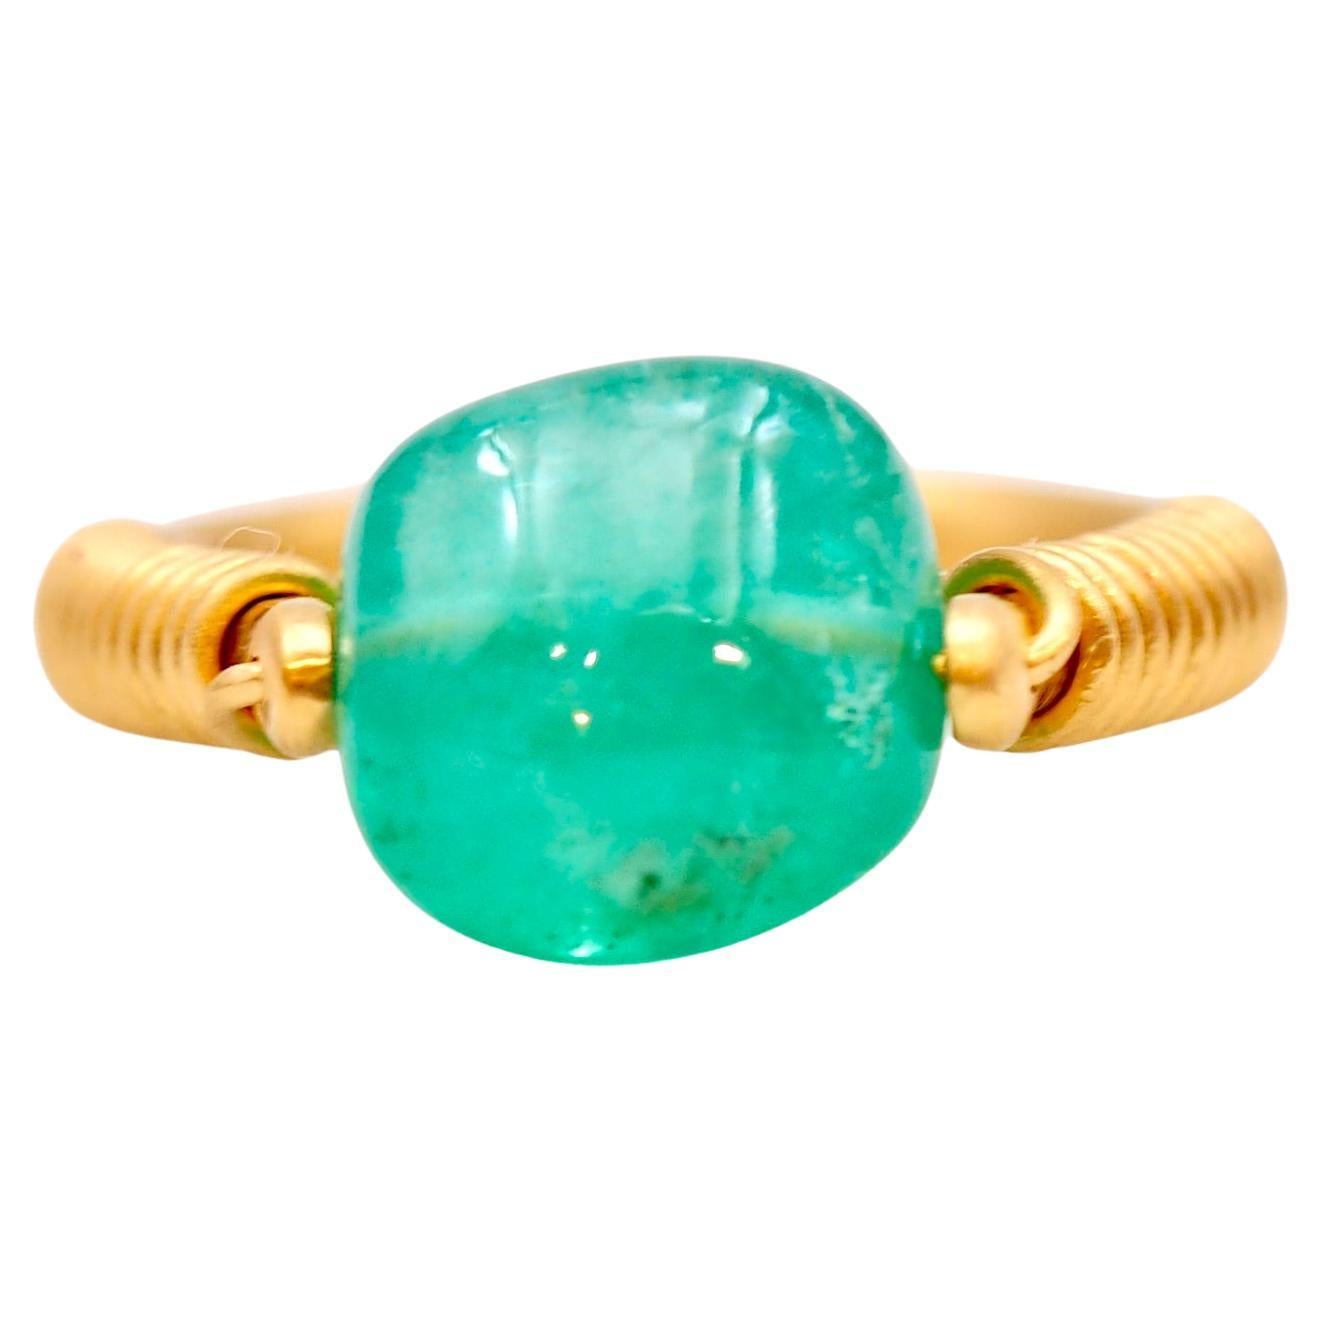 Scrives 6.09 Carat Emerald Colombian Tumble Swivel 22 Karat Gold Cocktail Ring For Sale